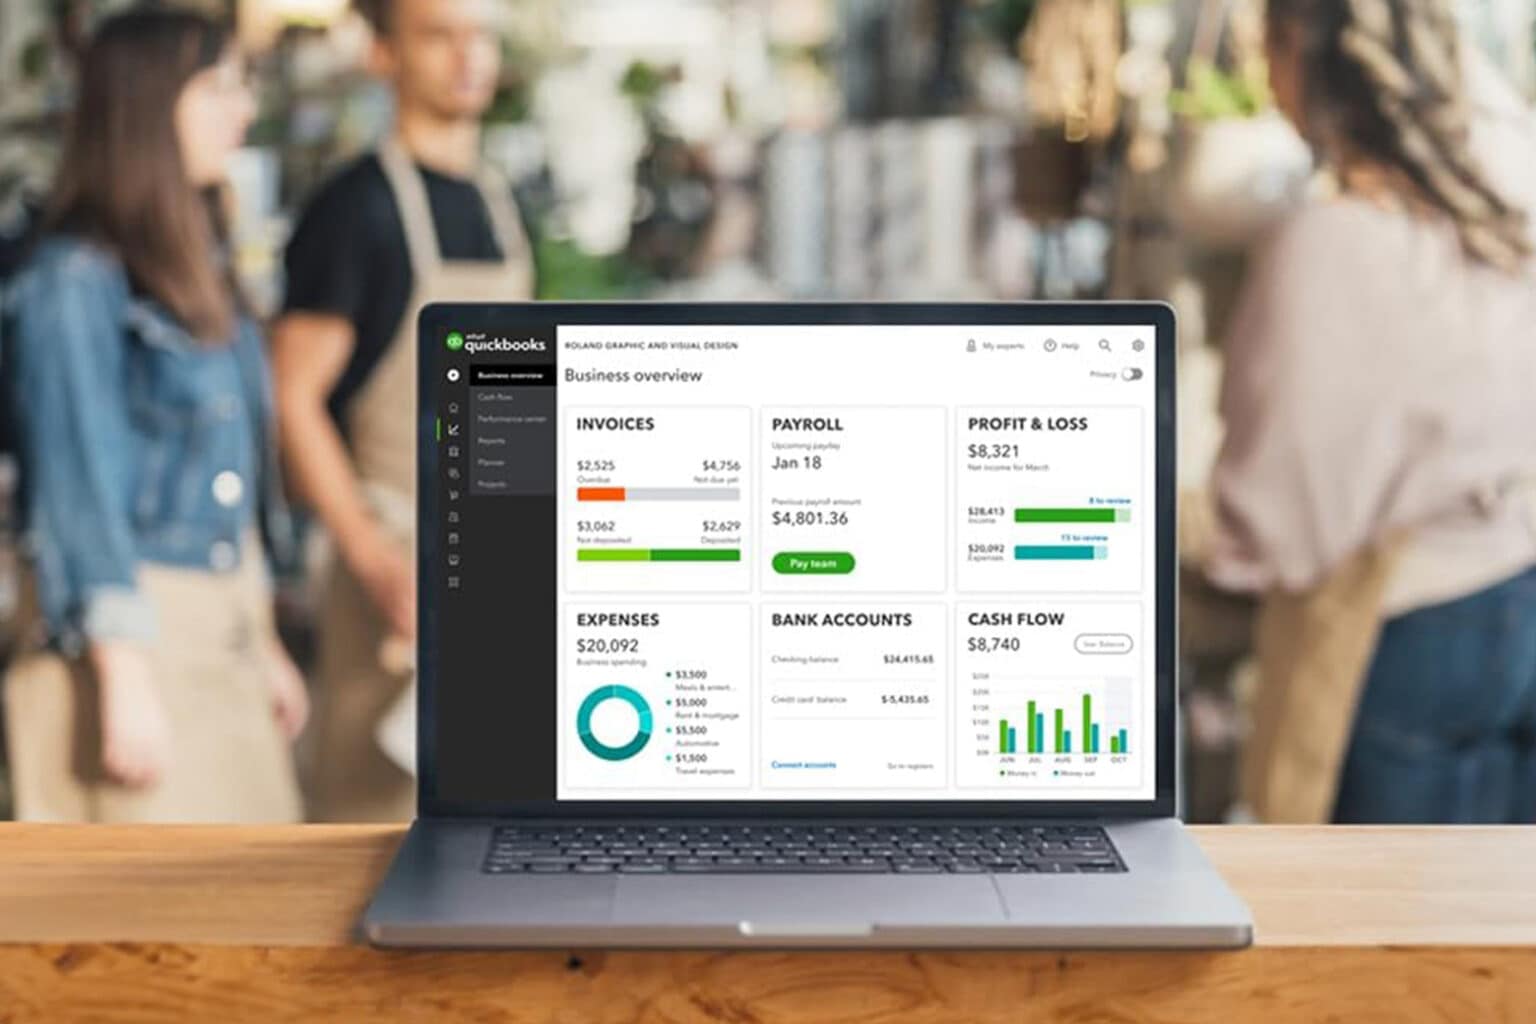 Intuit QuickBooks Online makes finance tracking more efficient, now under $250.